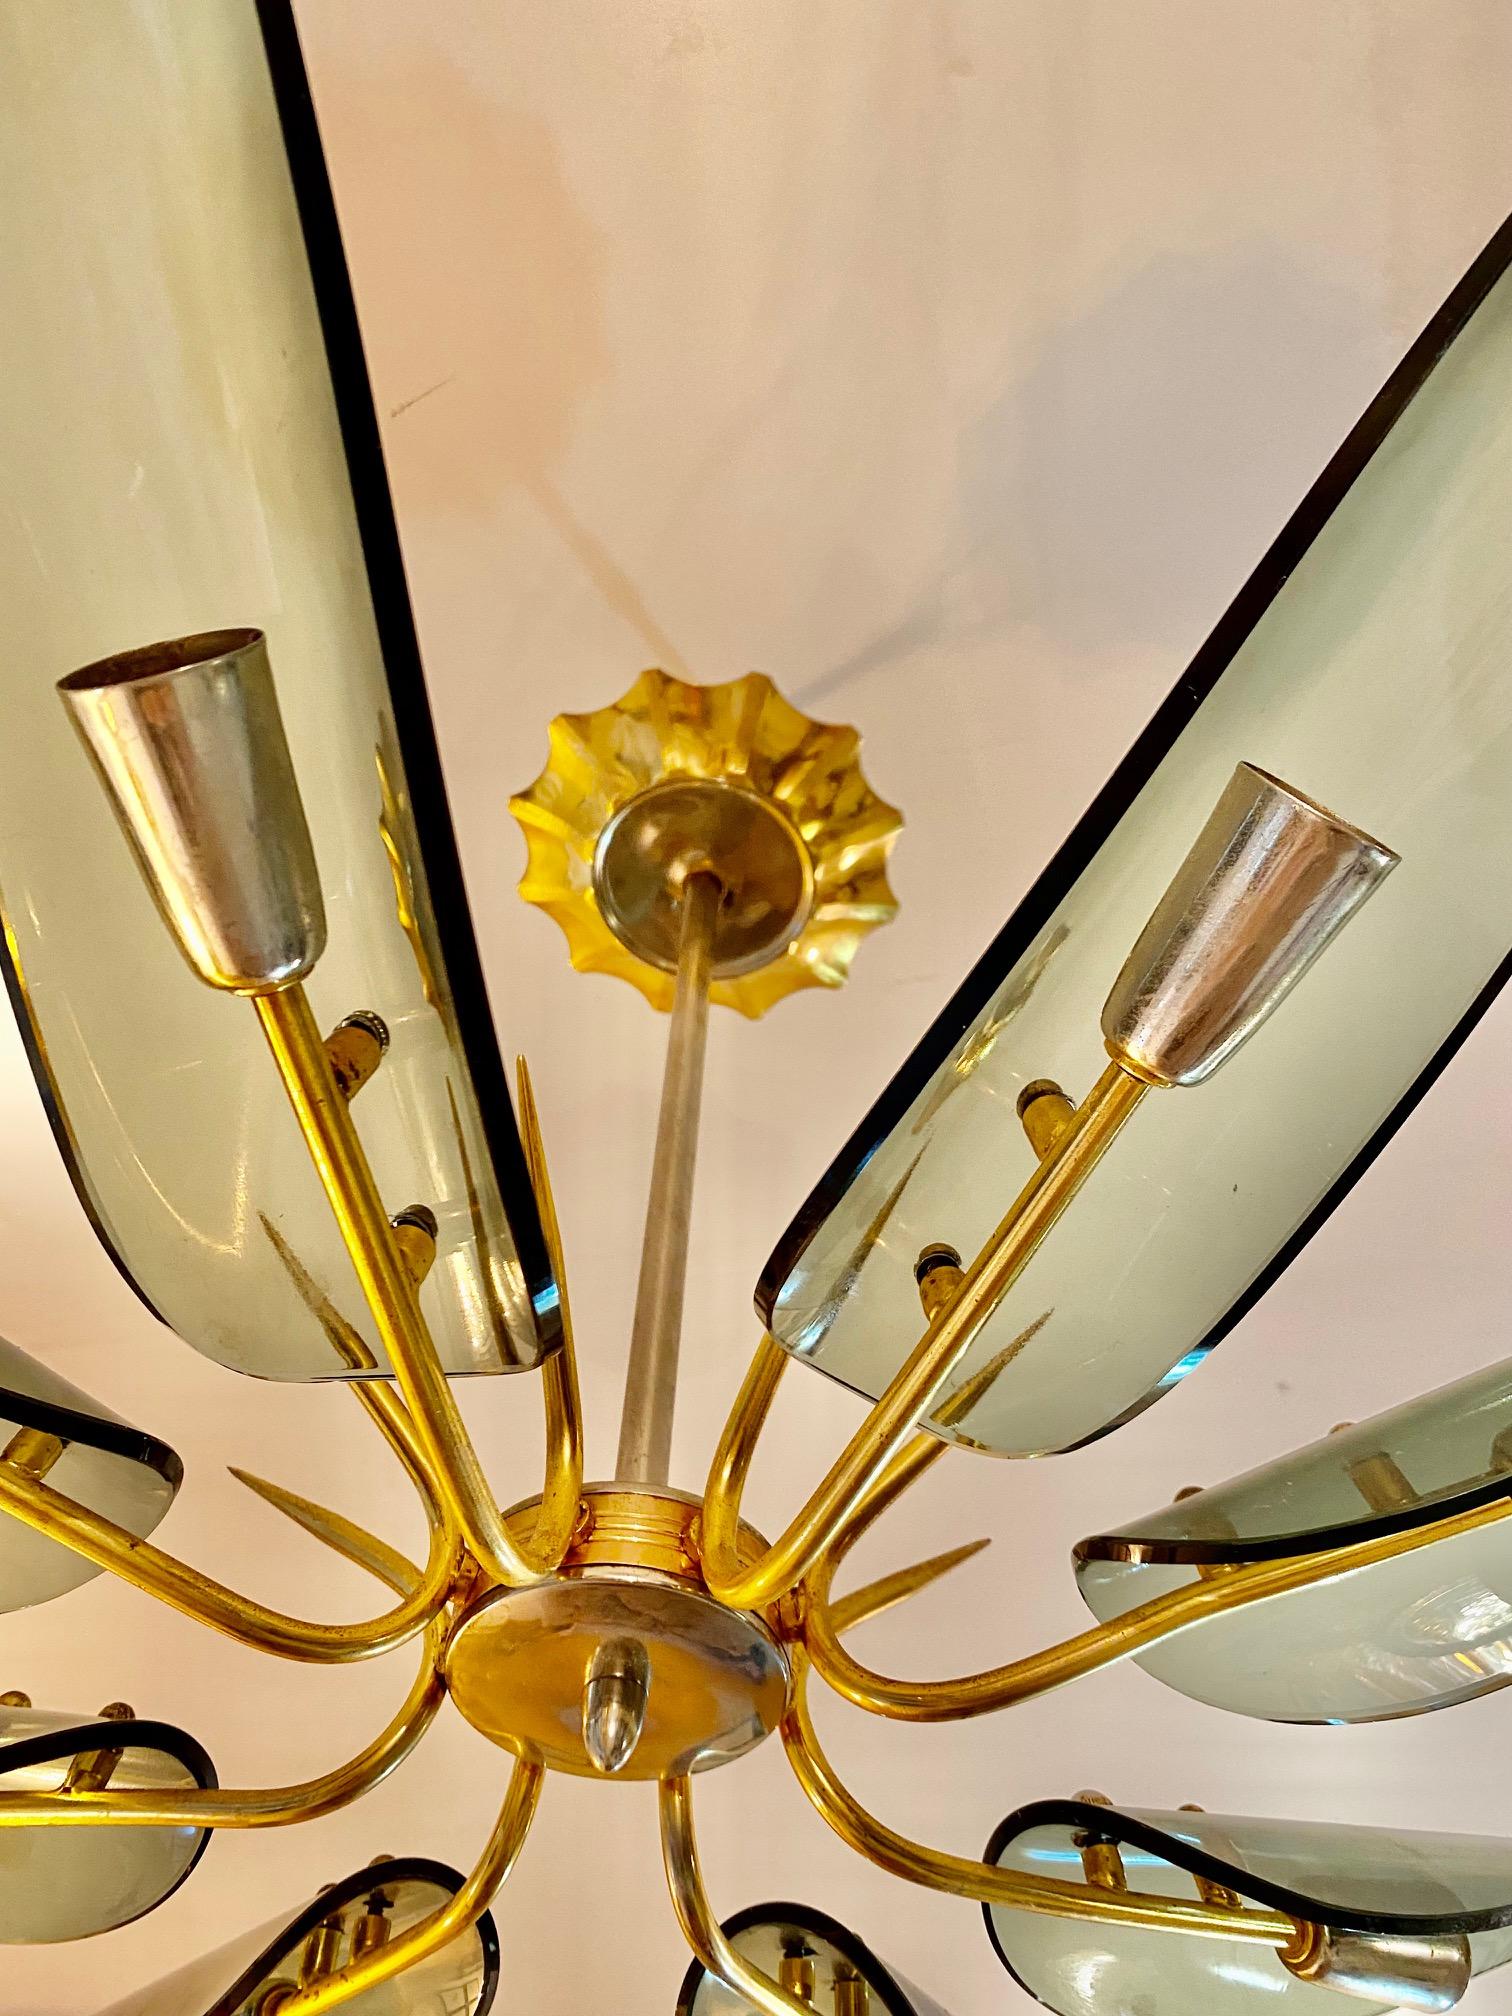 Superb chandelier with glass oversized 93 cm with gilt gold structure. The Design and the quality of the glass make this piece the best of the italian Design.

This Pieces of Arts glass show the exclusive design of Italian Designer in 1960/70.